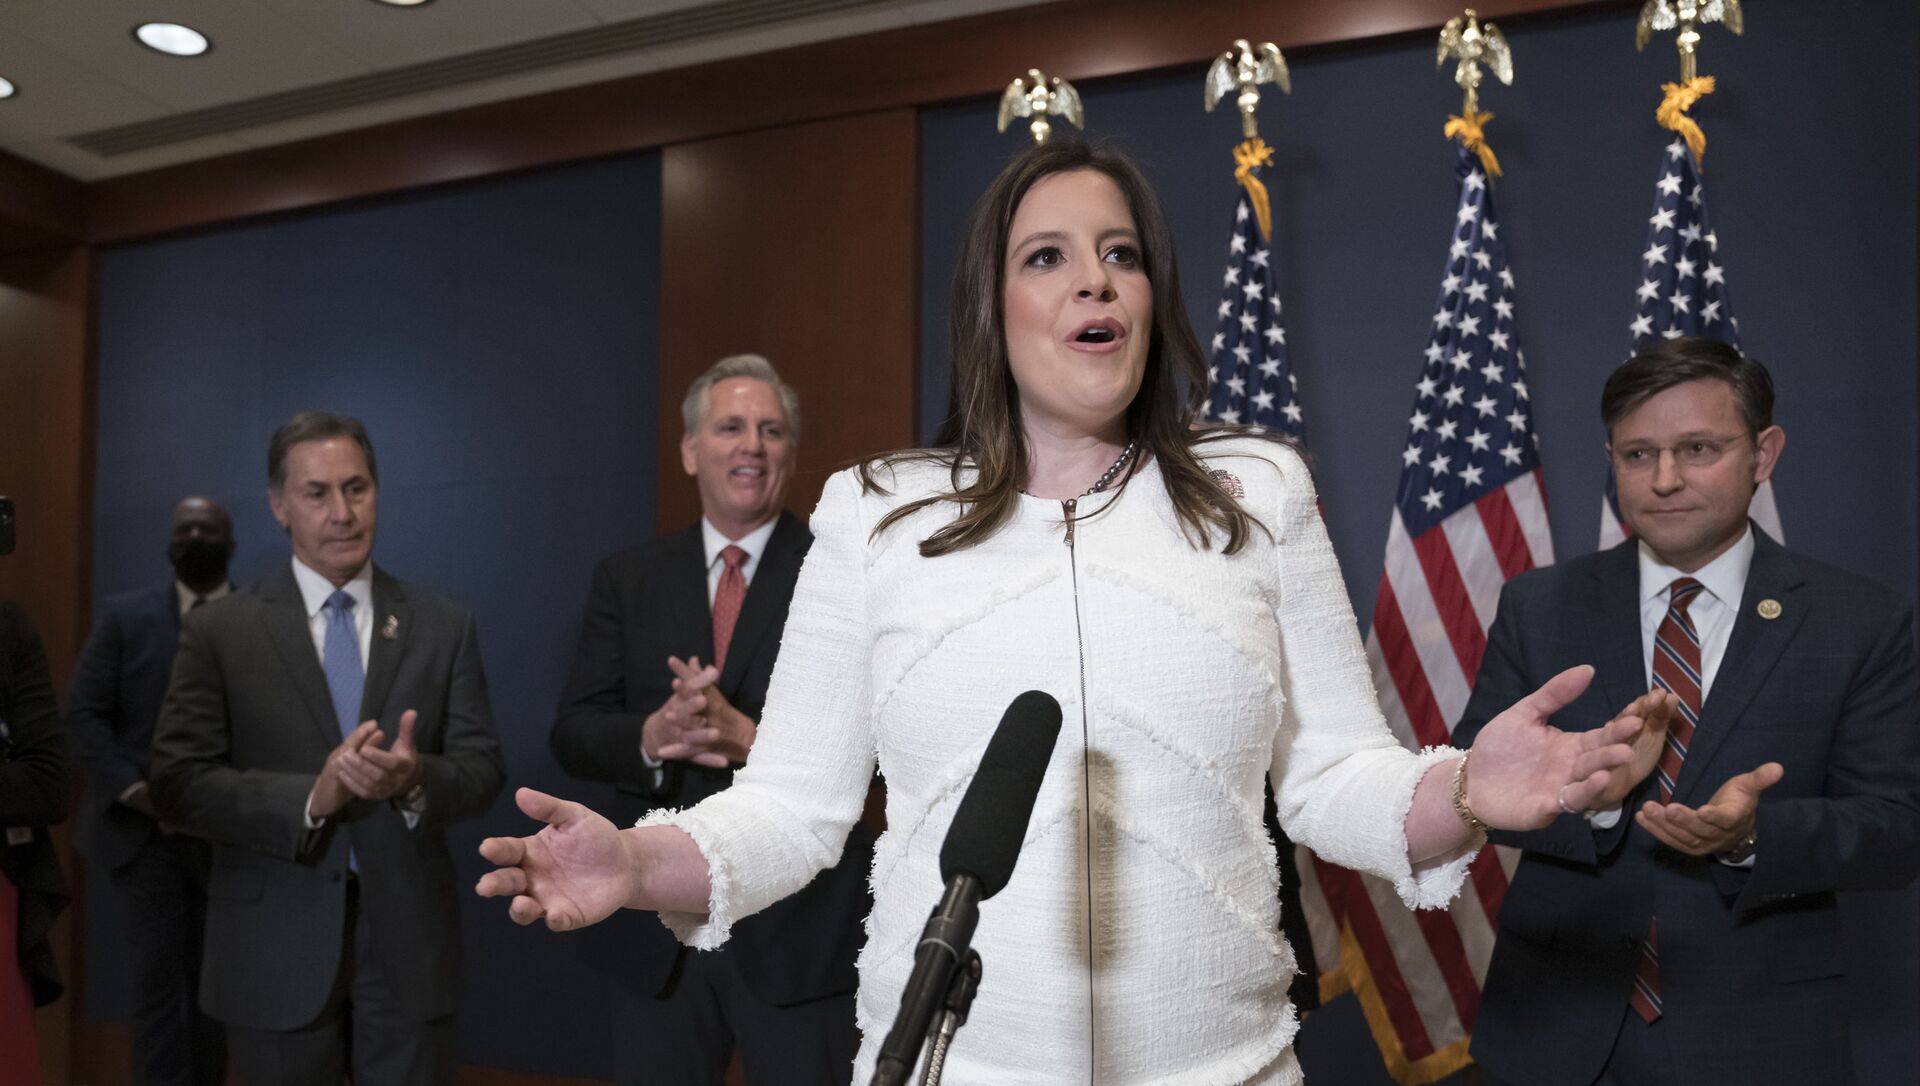 Rep. Elise Stefanik, R-N.Y., speaks to reporters at the Capitol in Washington, Friday, May 14, 2021, just after she was elected chair of the House Republican Conference - Sputnik International, 1920, 14.05.2021